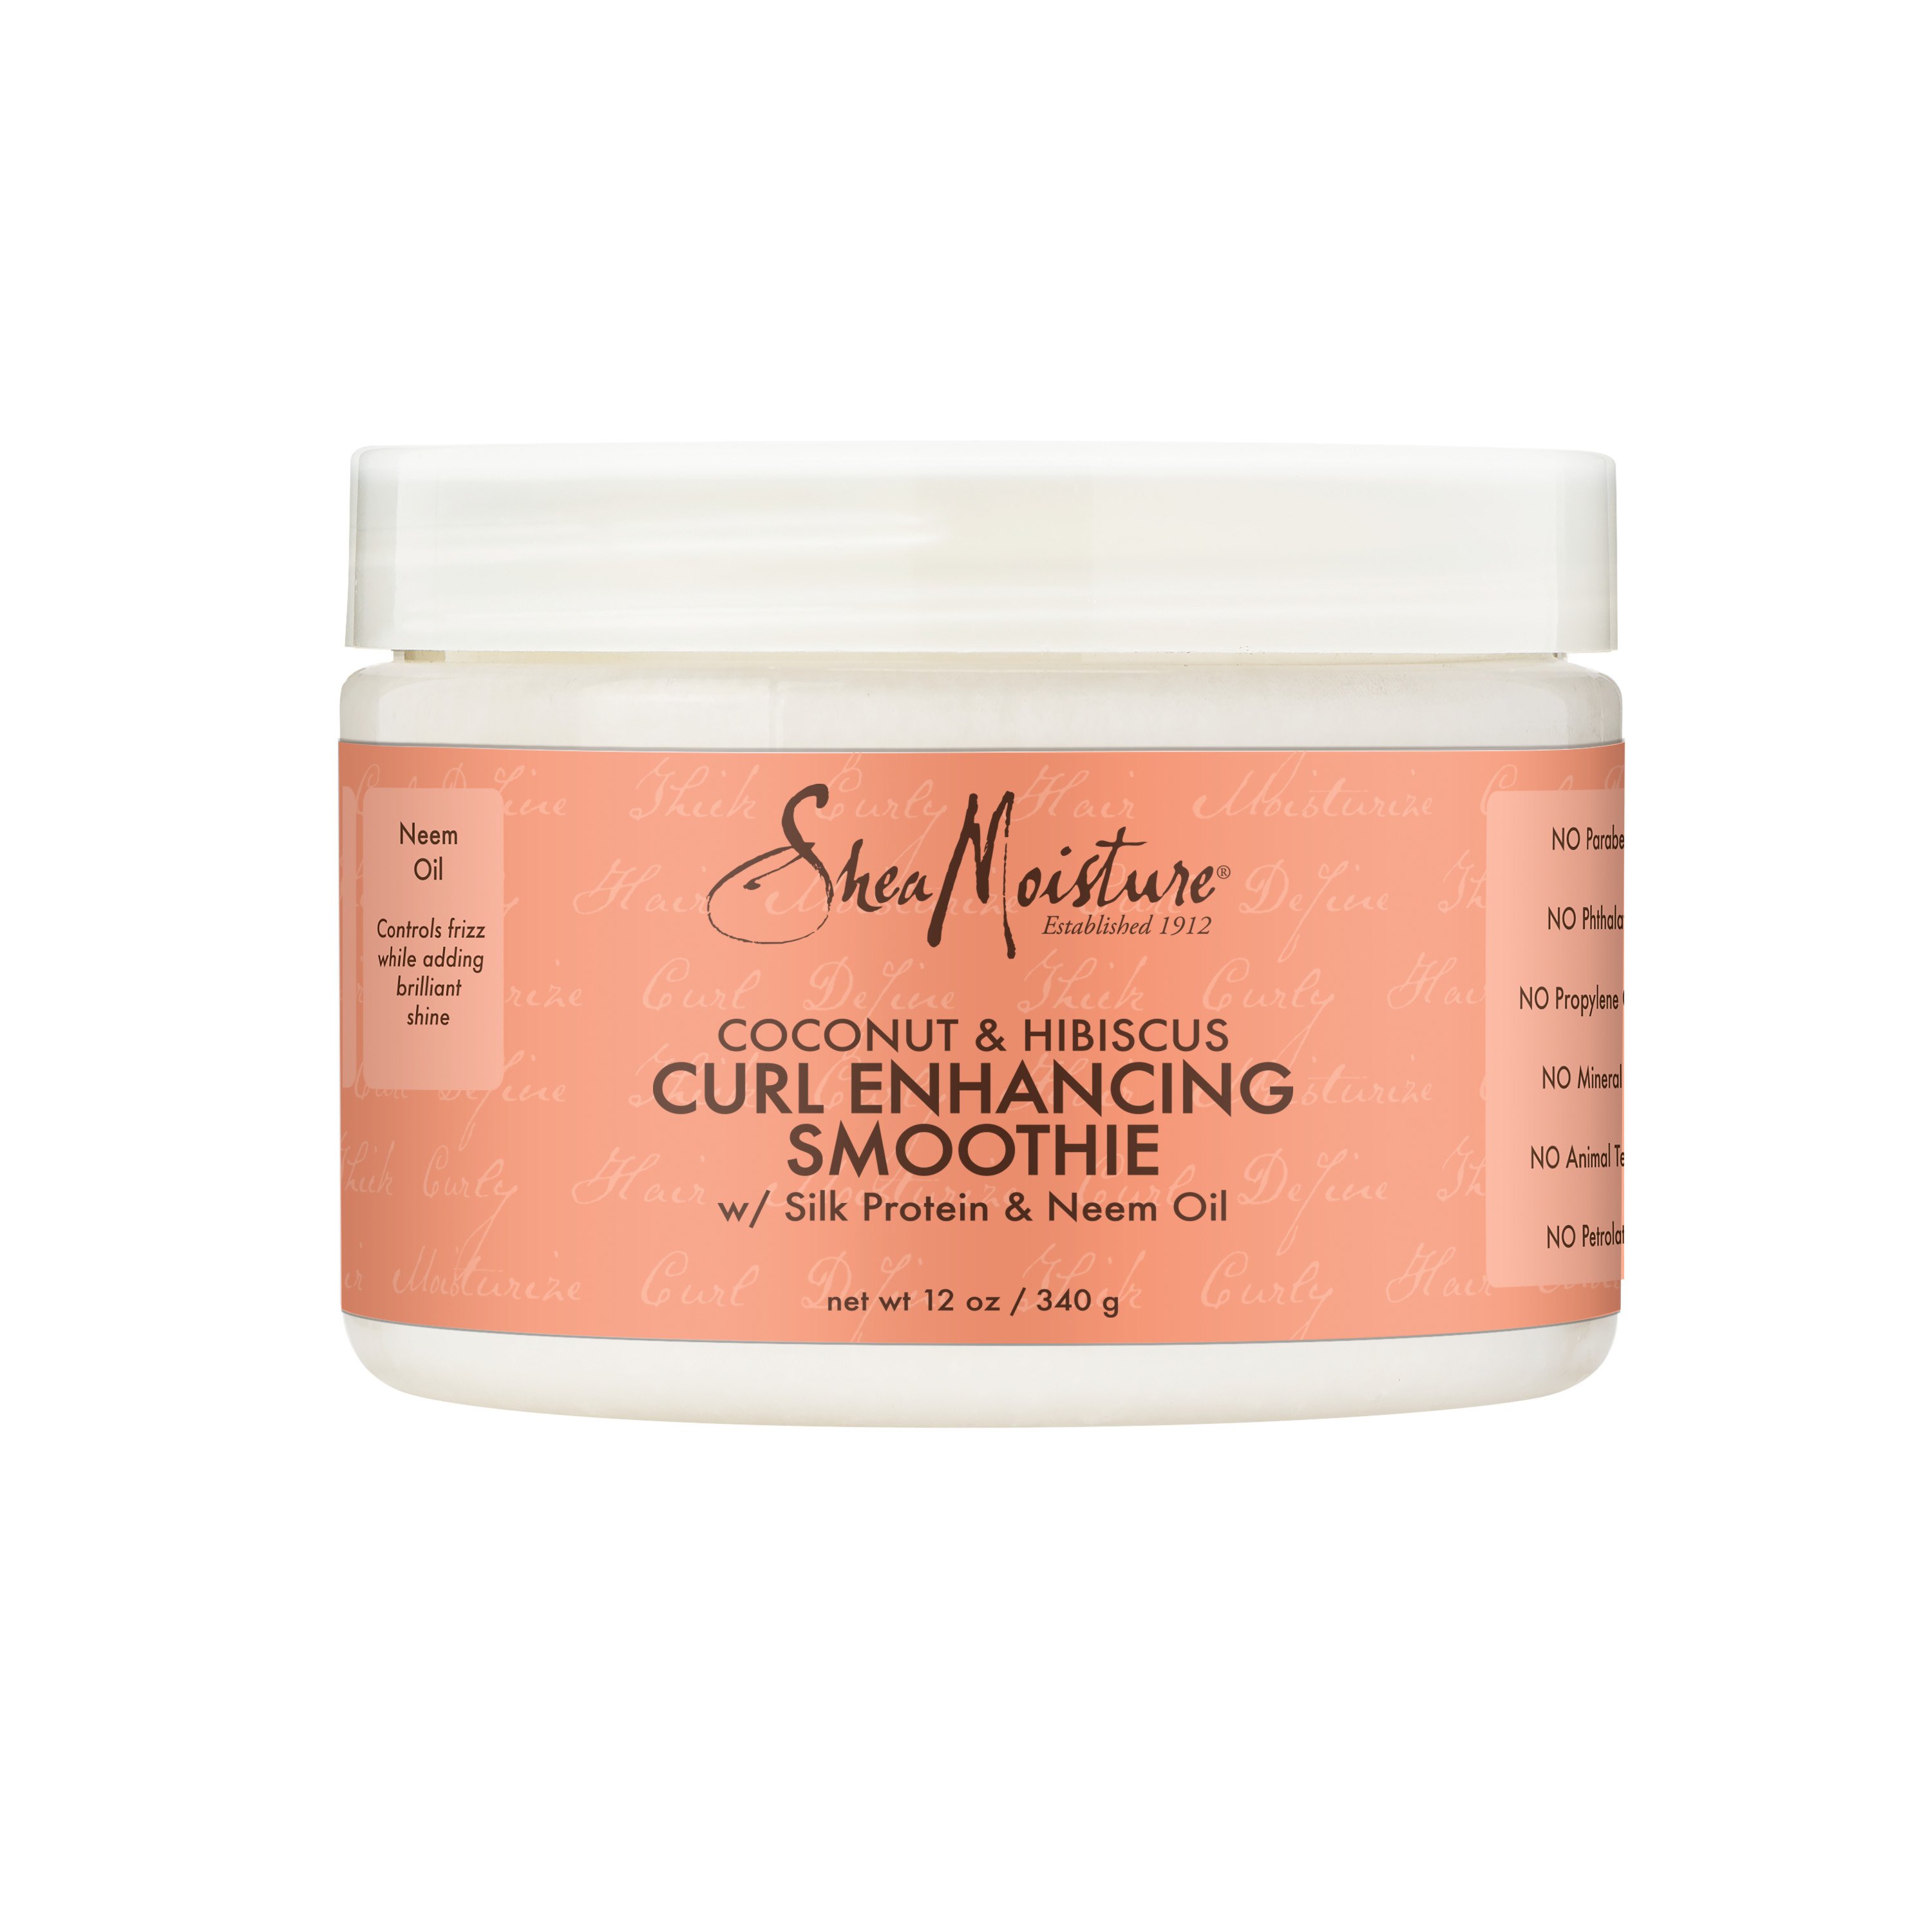 Shea Moisture Curl Enhancing Smoothie Shop Styling Products Treatments At H E B